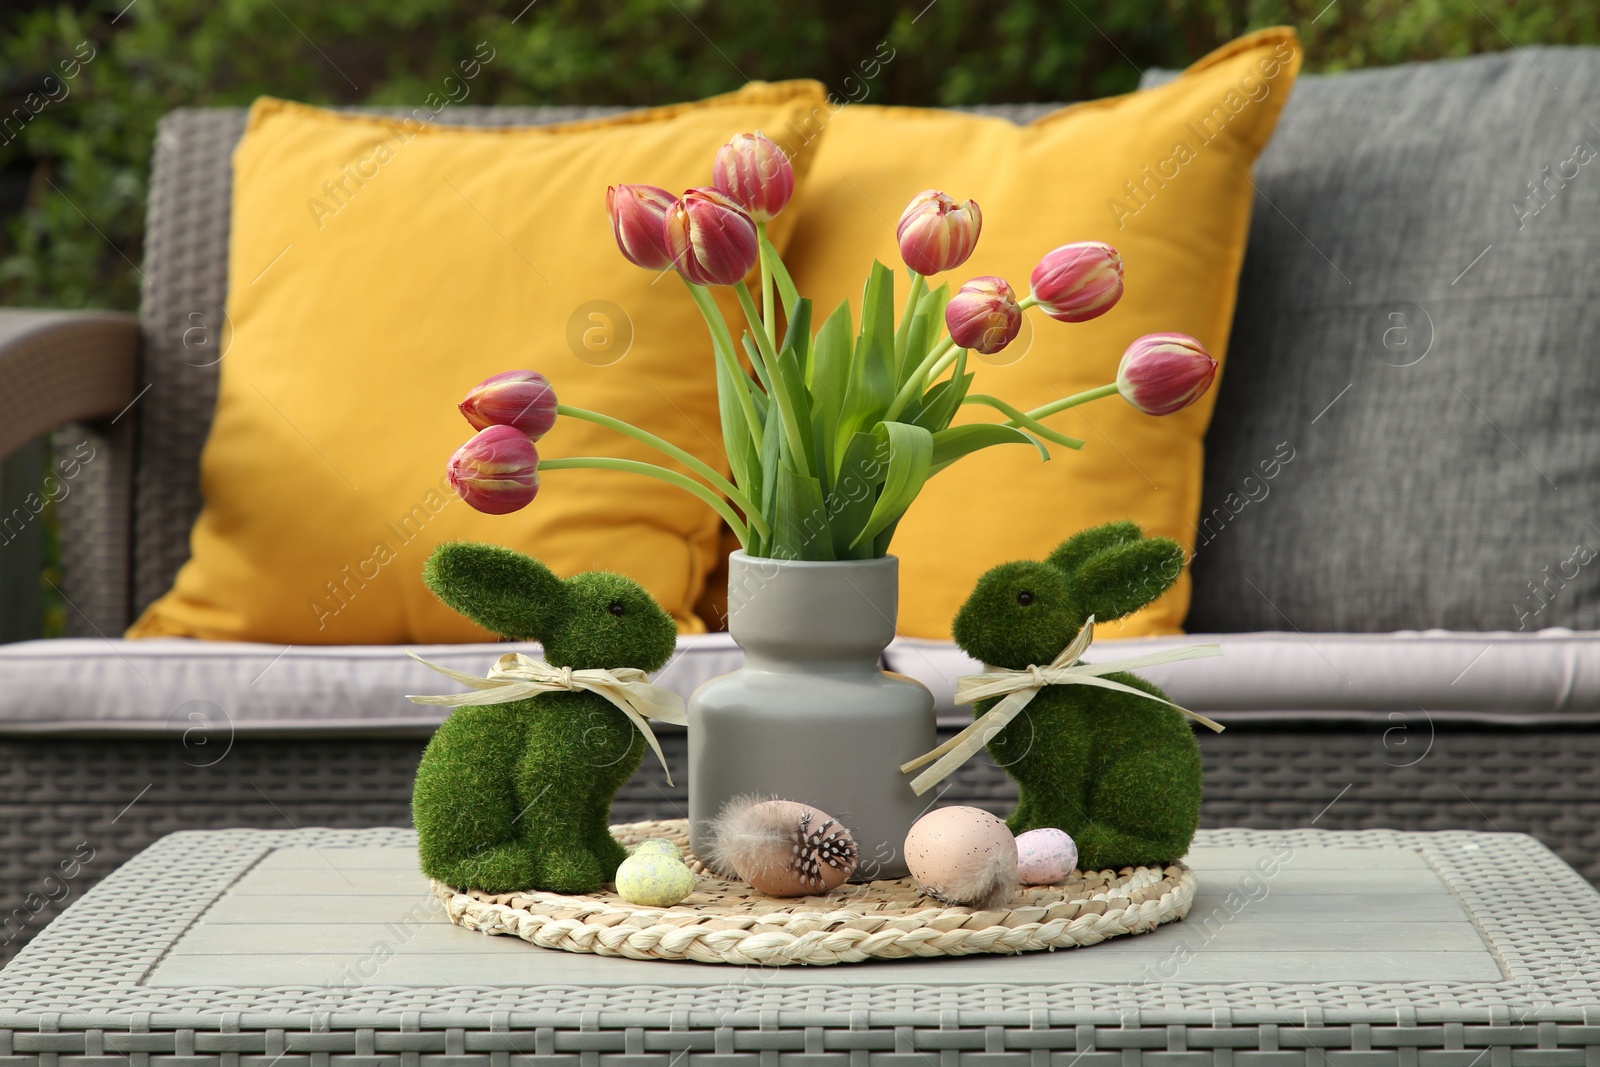 Photo of Terrace with Easter decorations. Bouquet of tulips in vase, bunny figures and decorated eggs on table outdoors